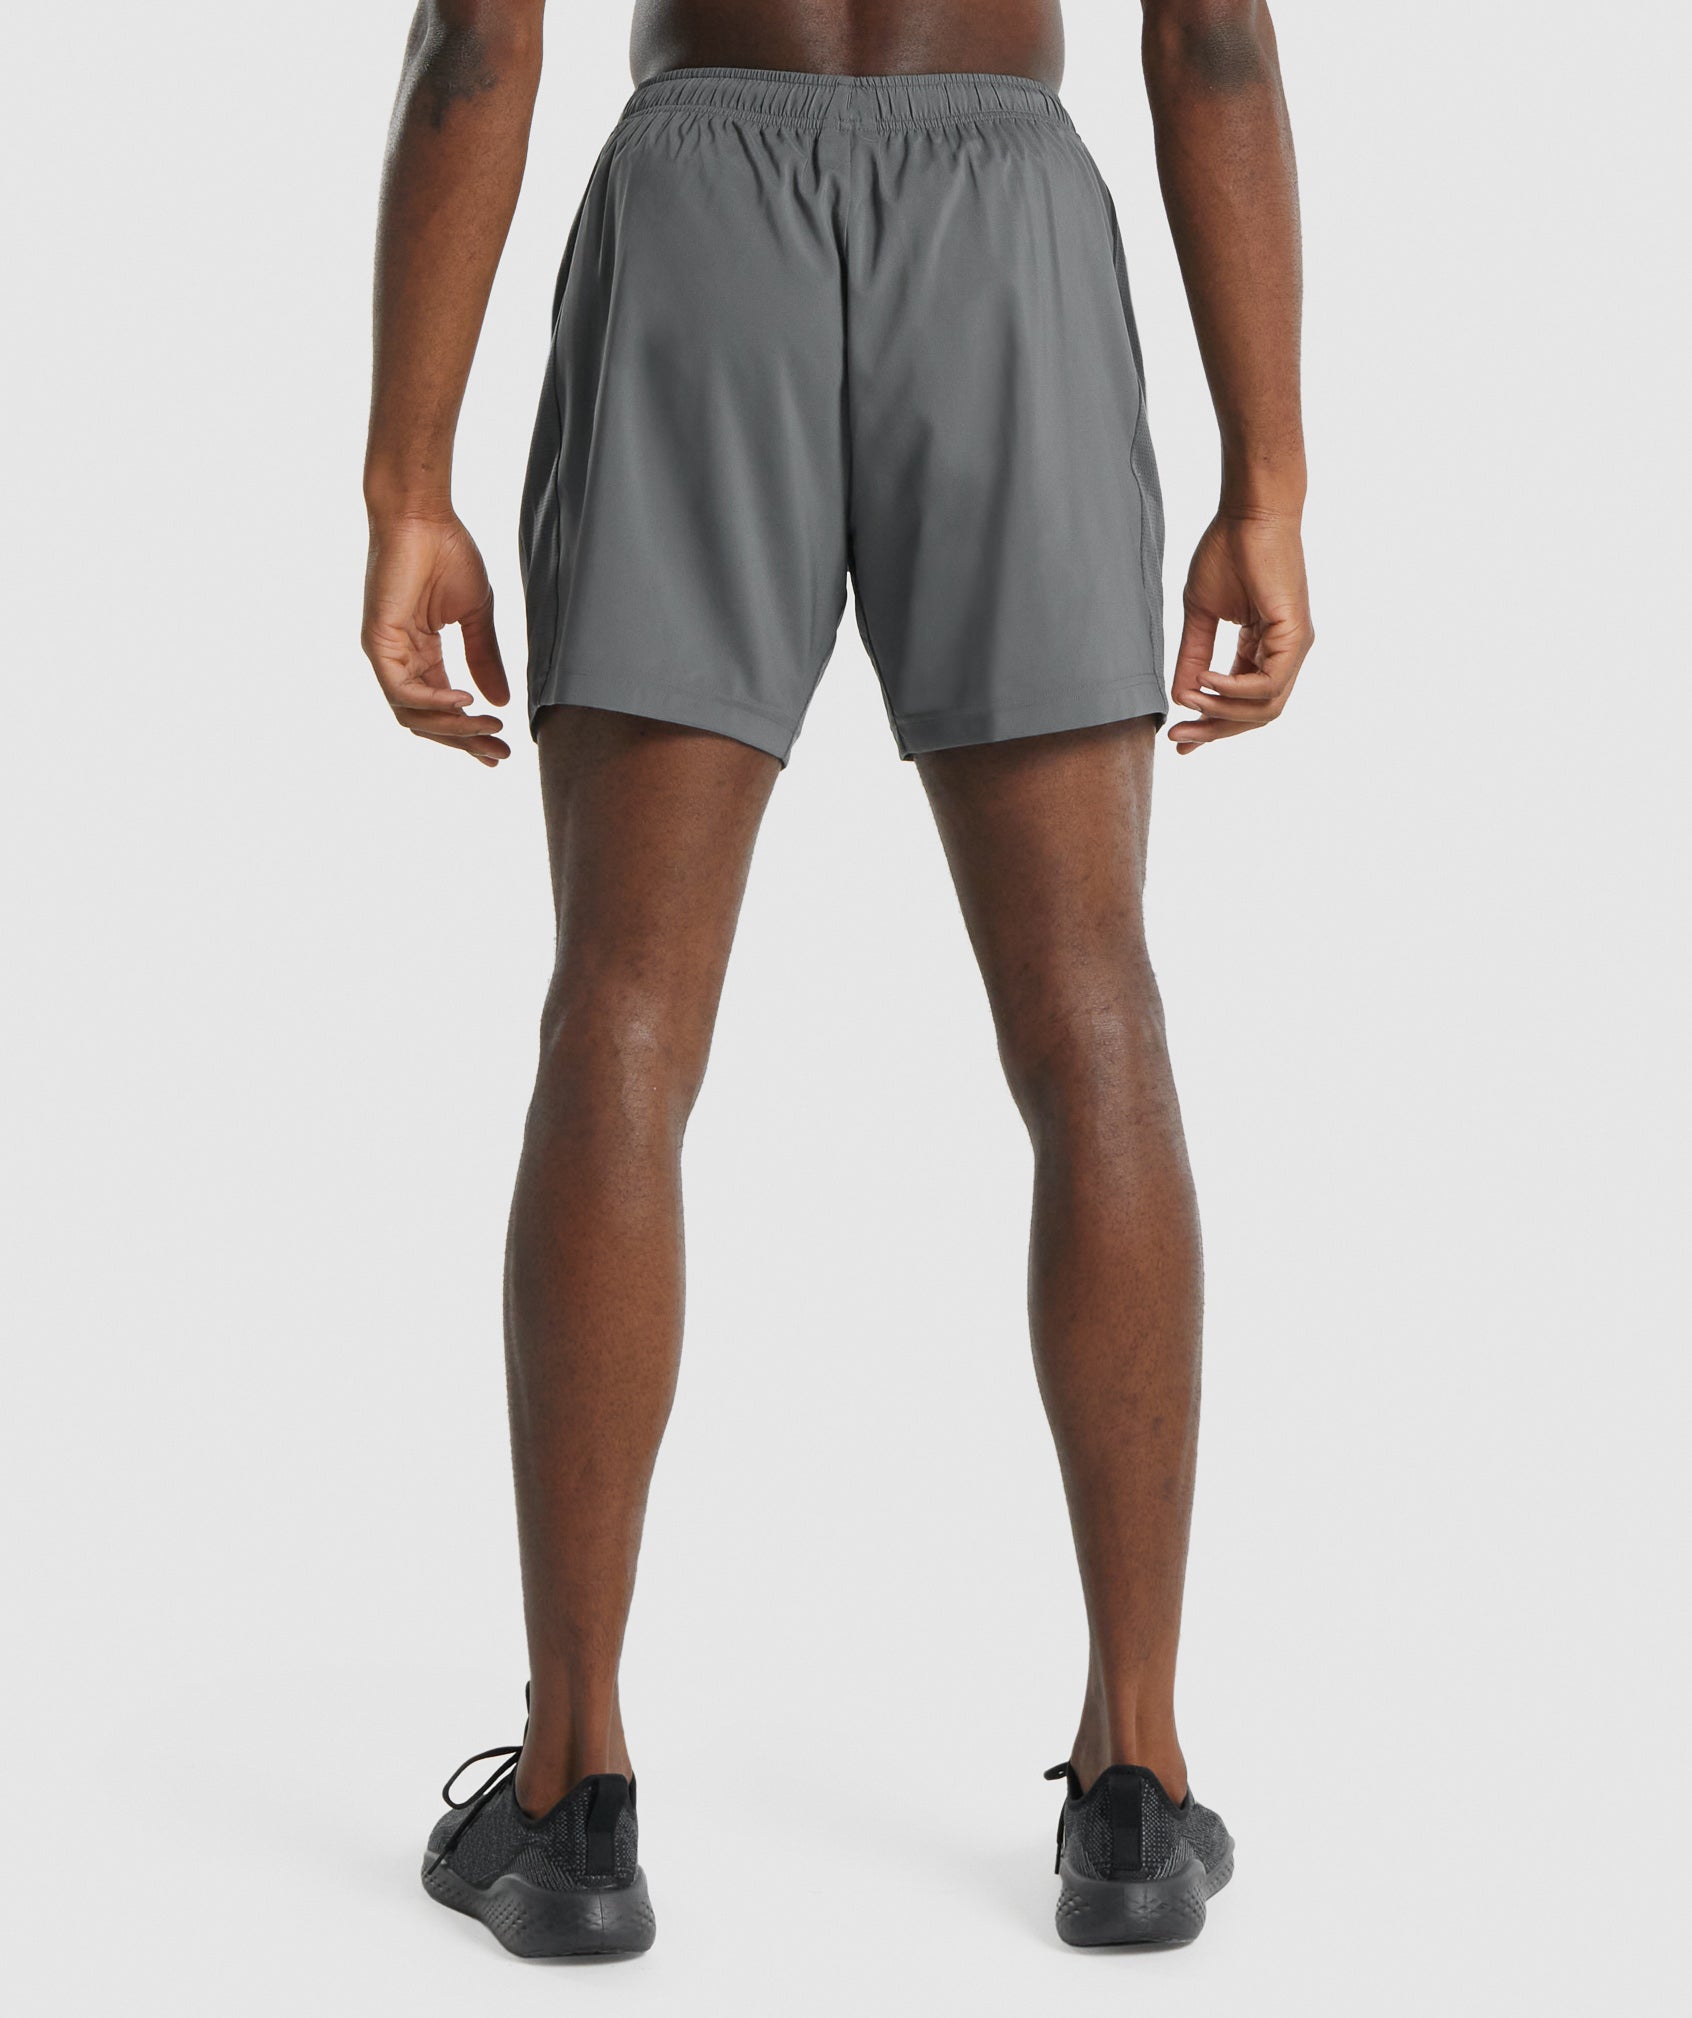 Sport Shorts in Charcoal - view 4